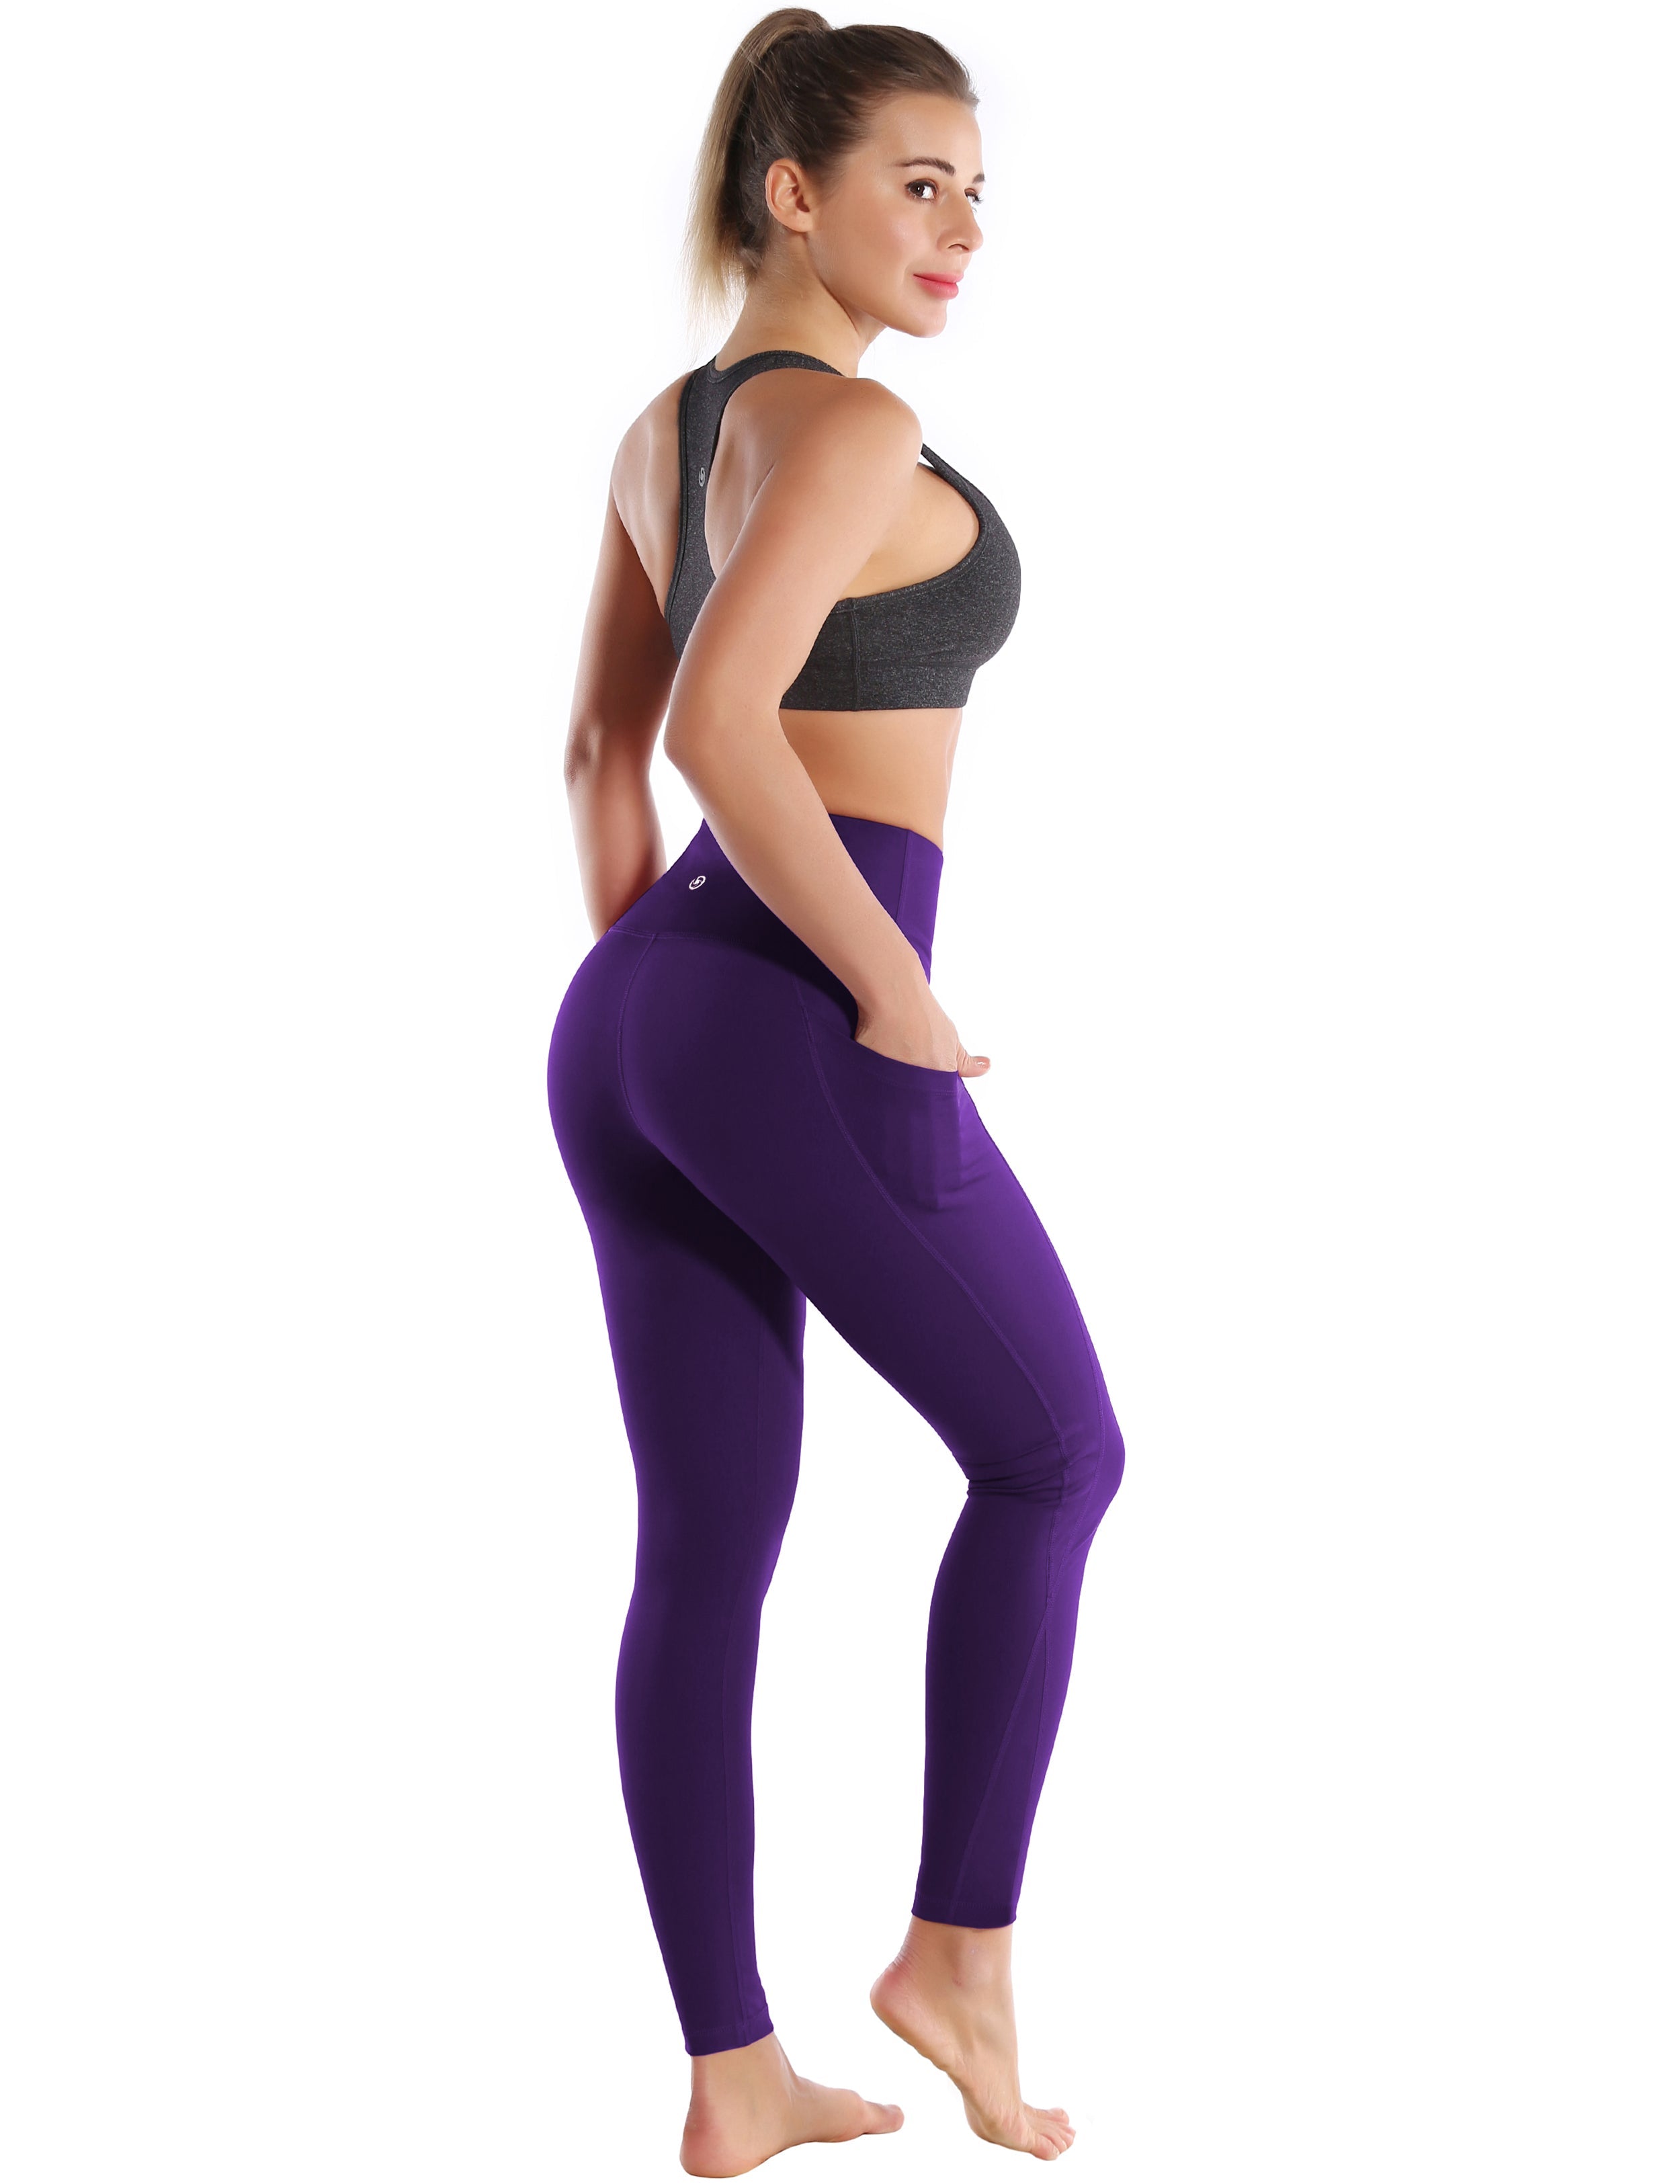 High Waist Side Pockets Running Pants grapevine 75% Nylon, 25% Spandex Fabric doesn't attract lint easily 4-way stretch No see-through Moisture-wicking Tummy control Inner pocket